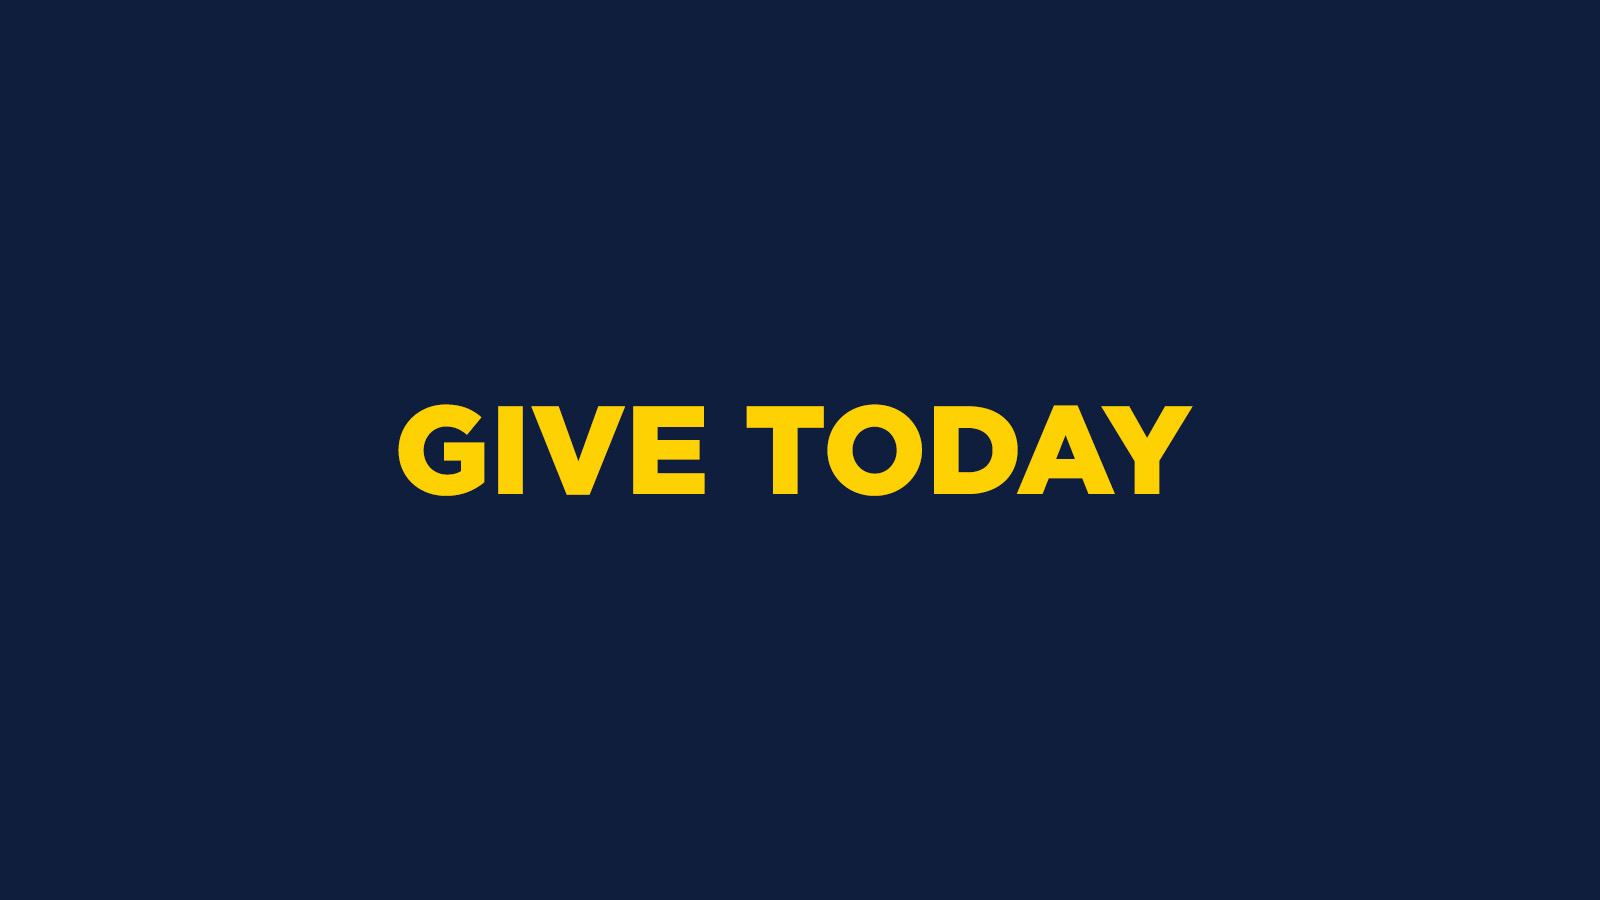 GIVE TODAY